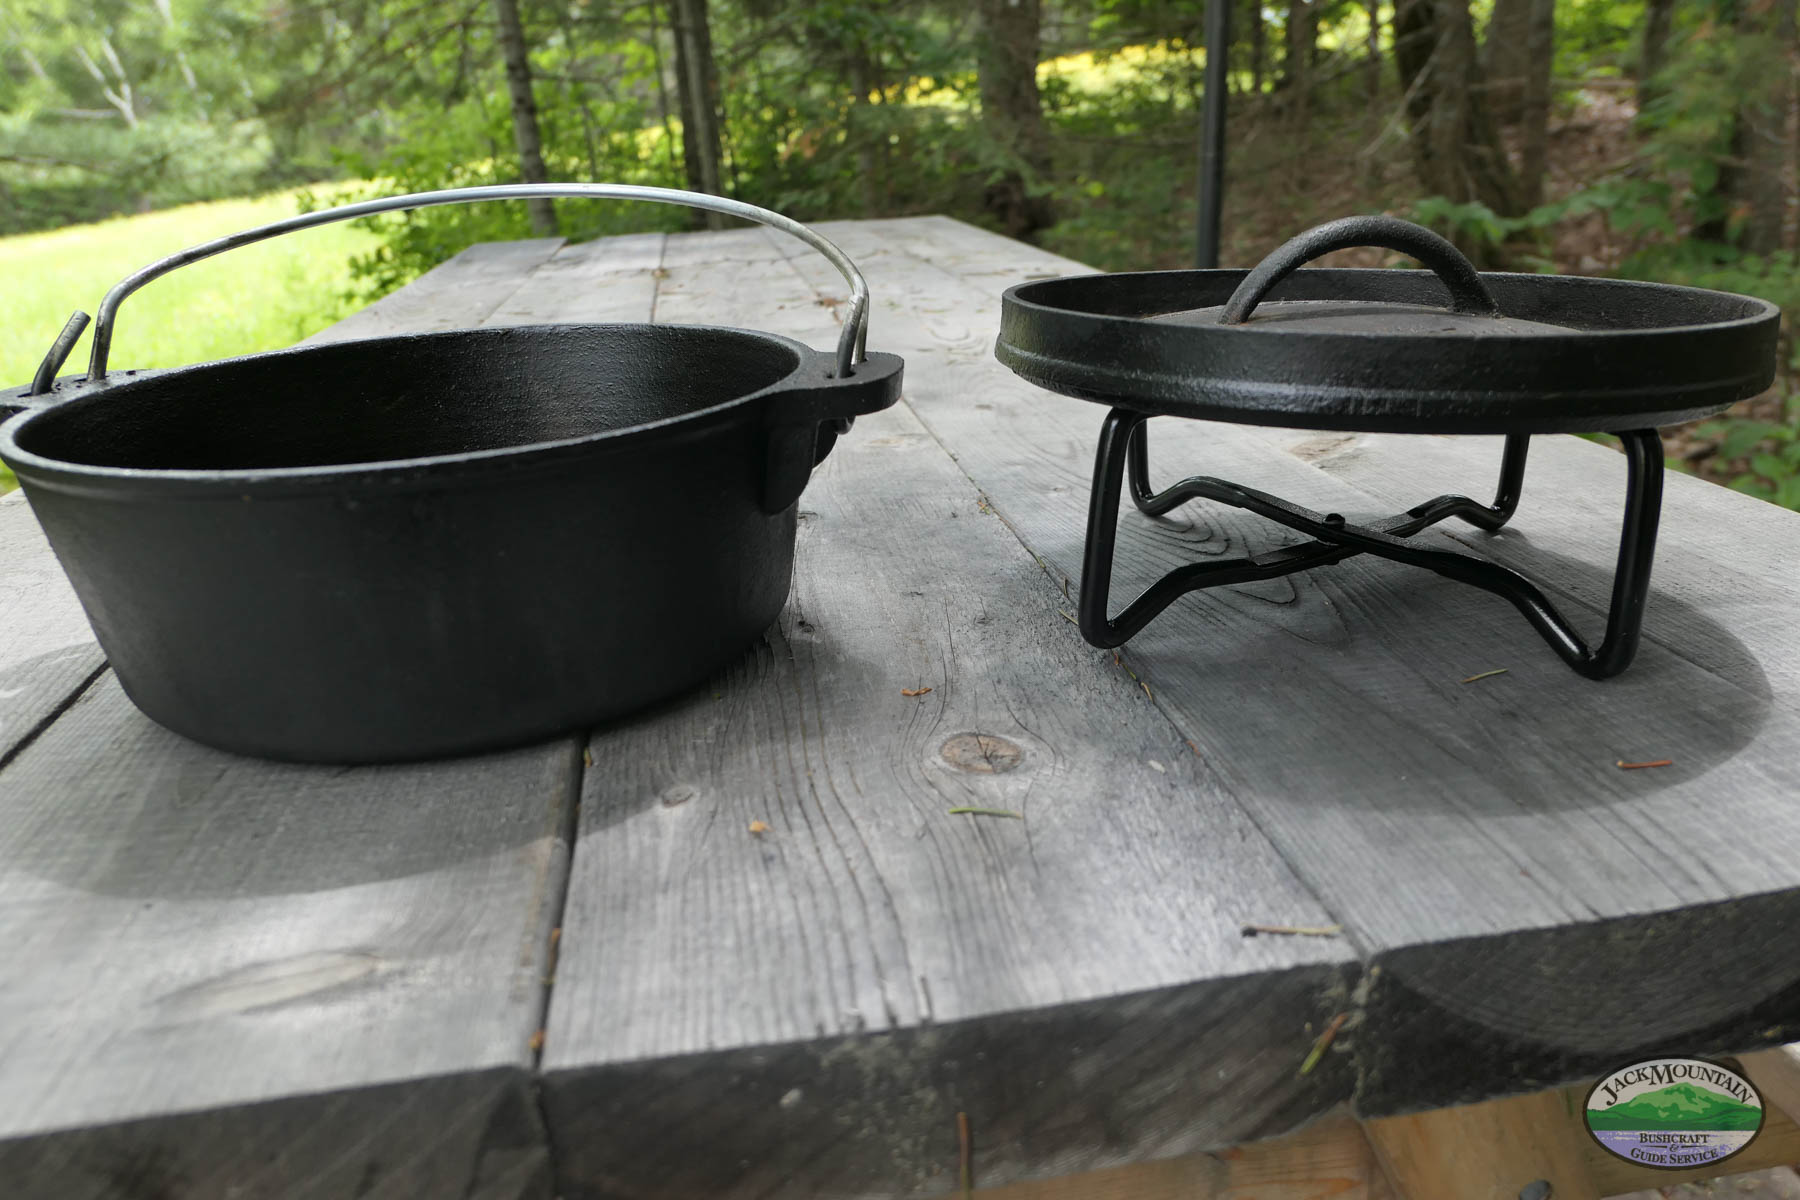 Dutch Oven Table  Dutch oven table, Dutch oven, Dutch oven camping